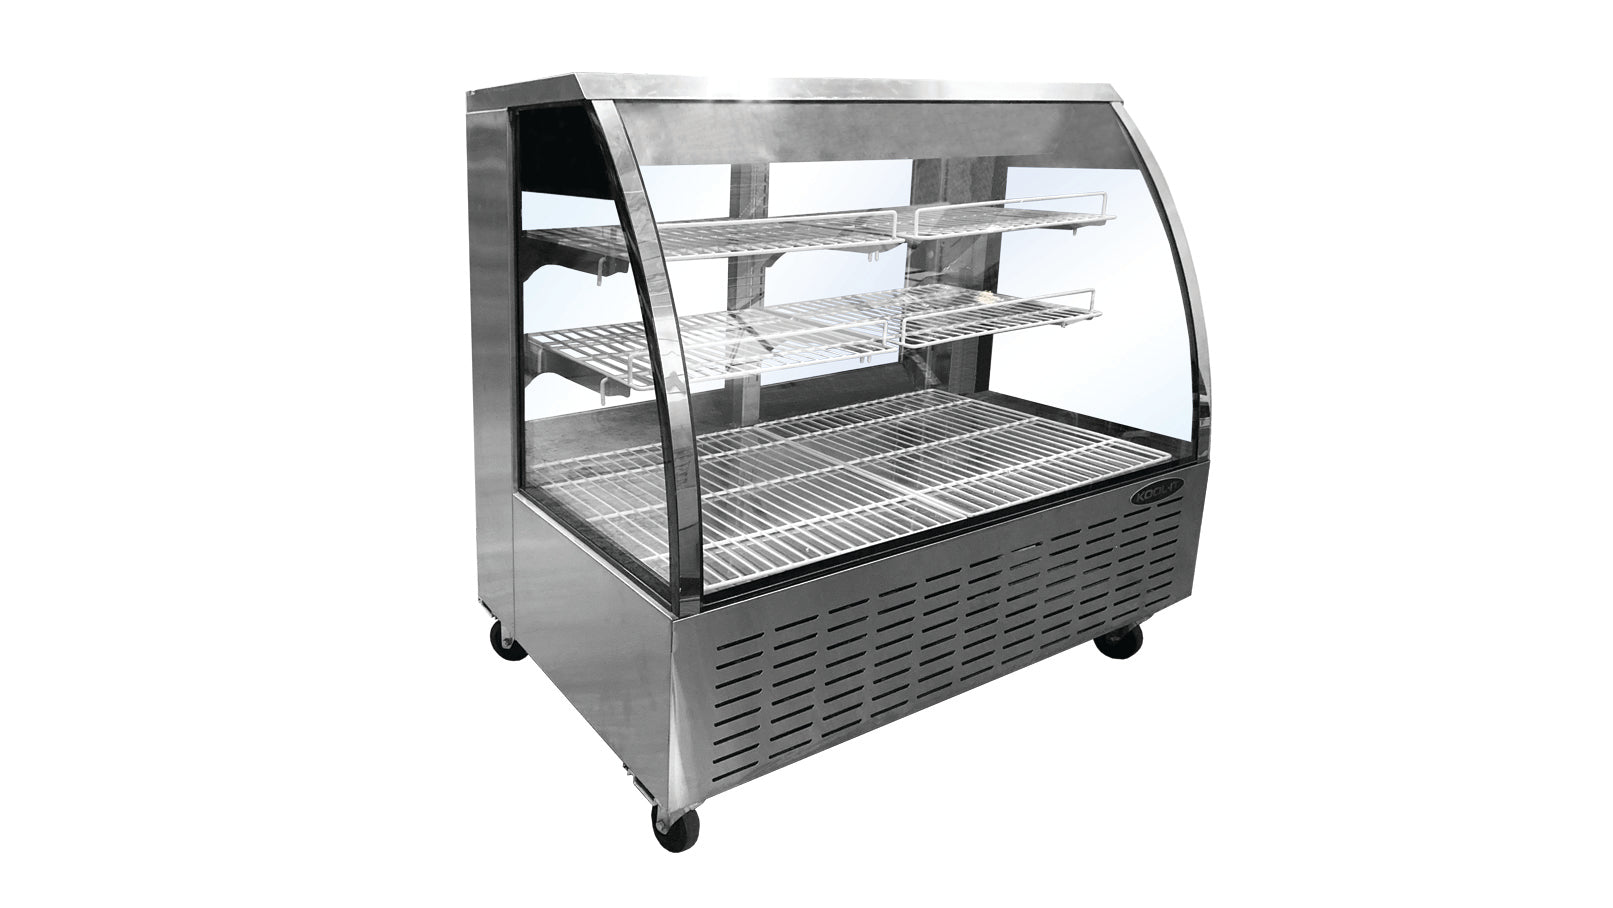 Kool-It - KDG-60, 60" Curved Glass Deli Cases With 21.5 cu.ft Capacity